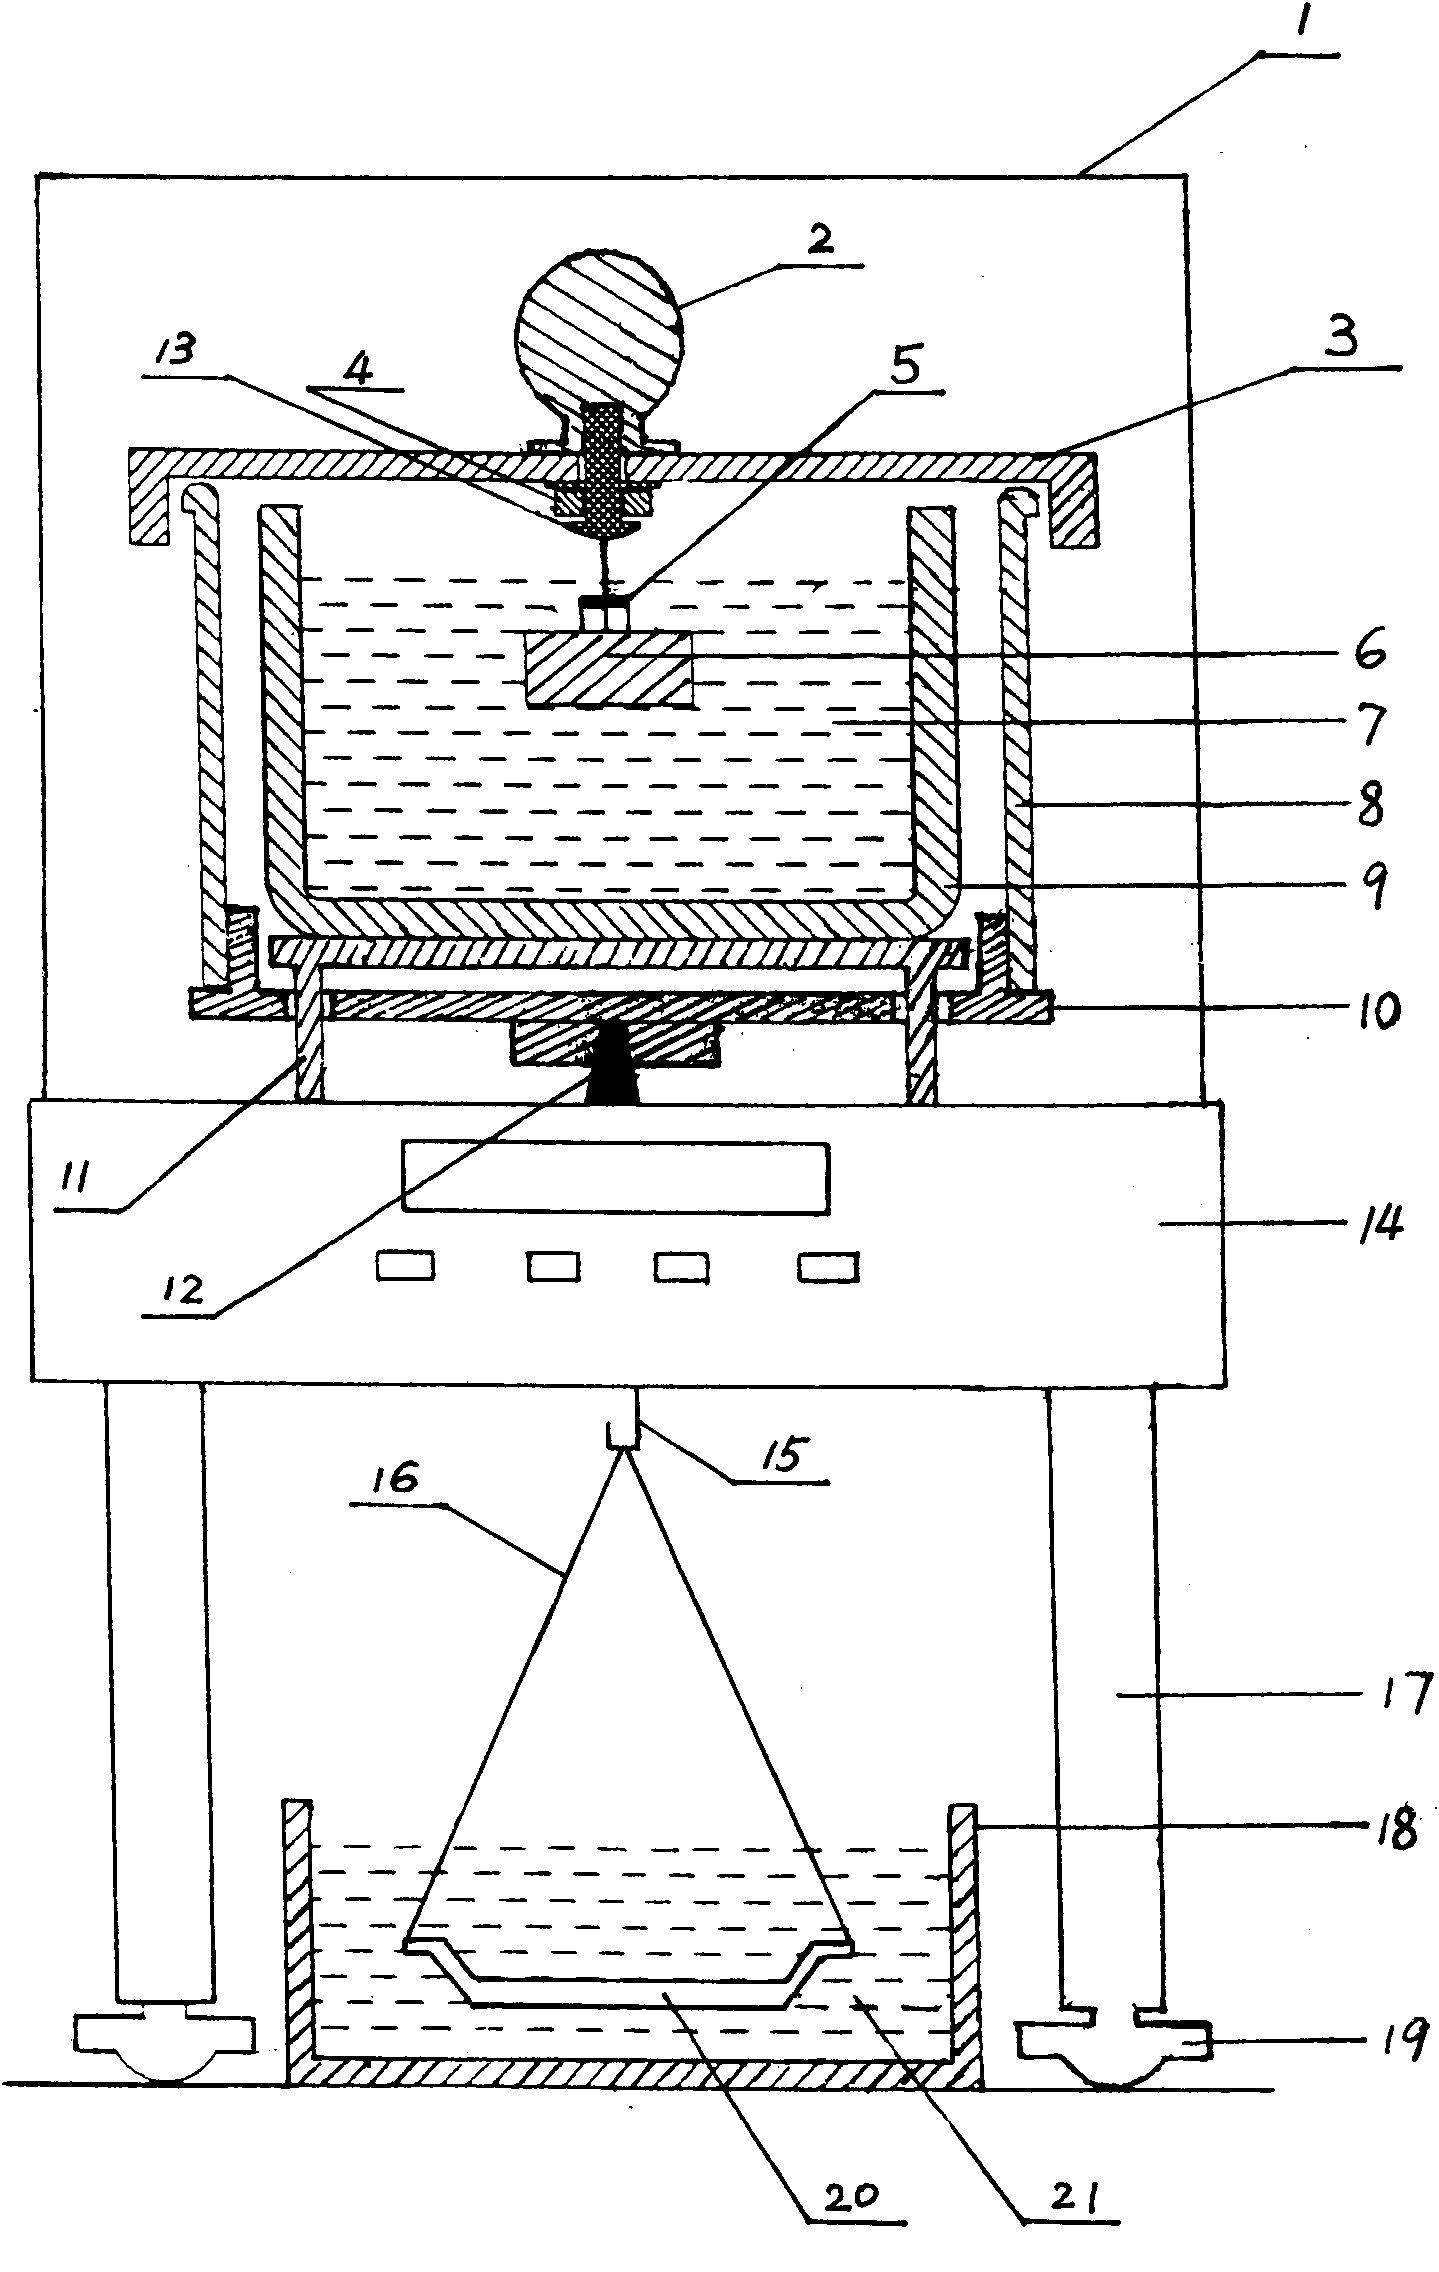 Method and apparatus for rapid measuring of density